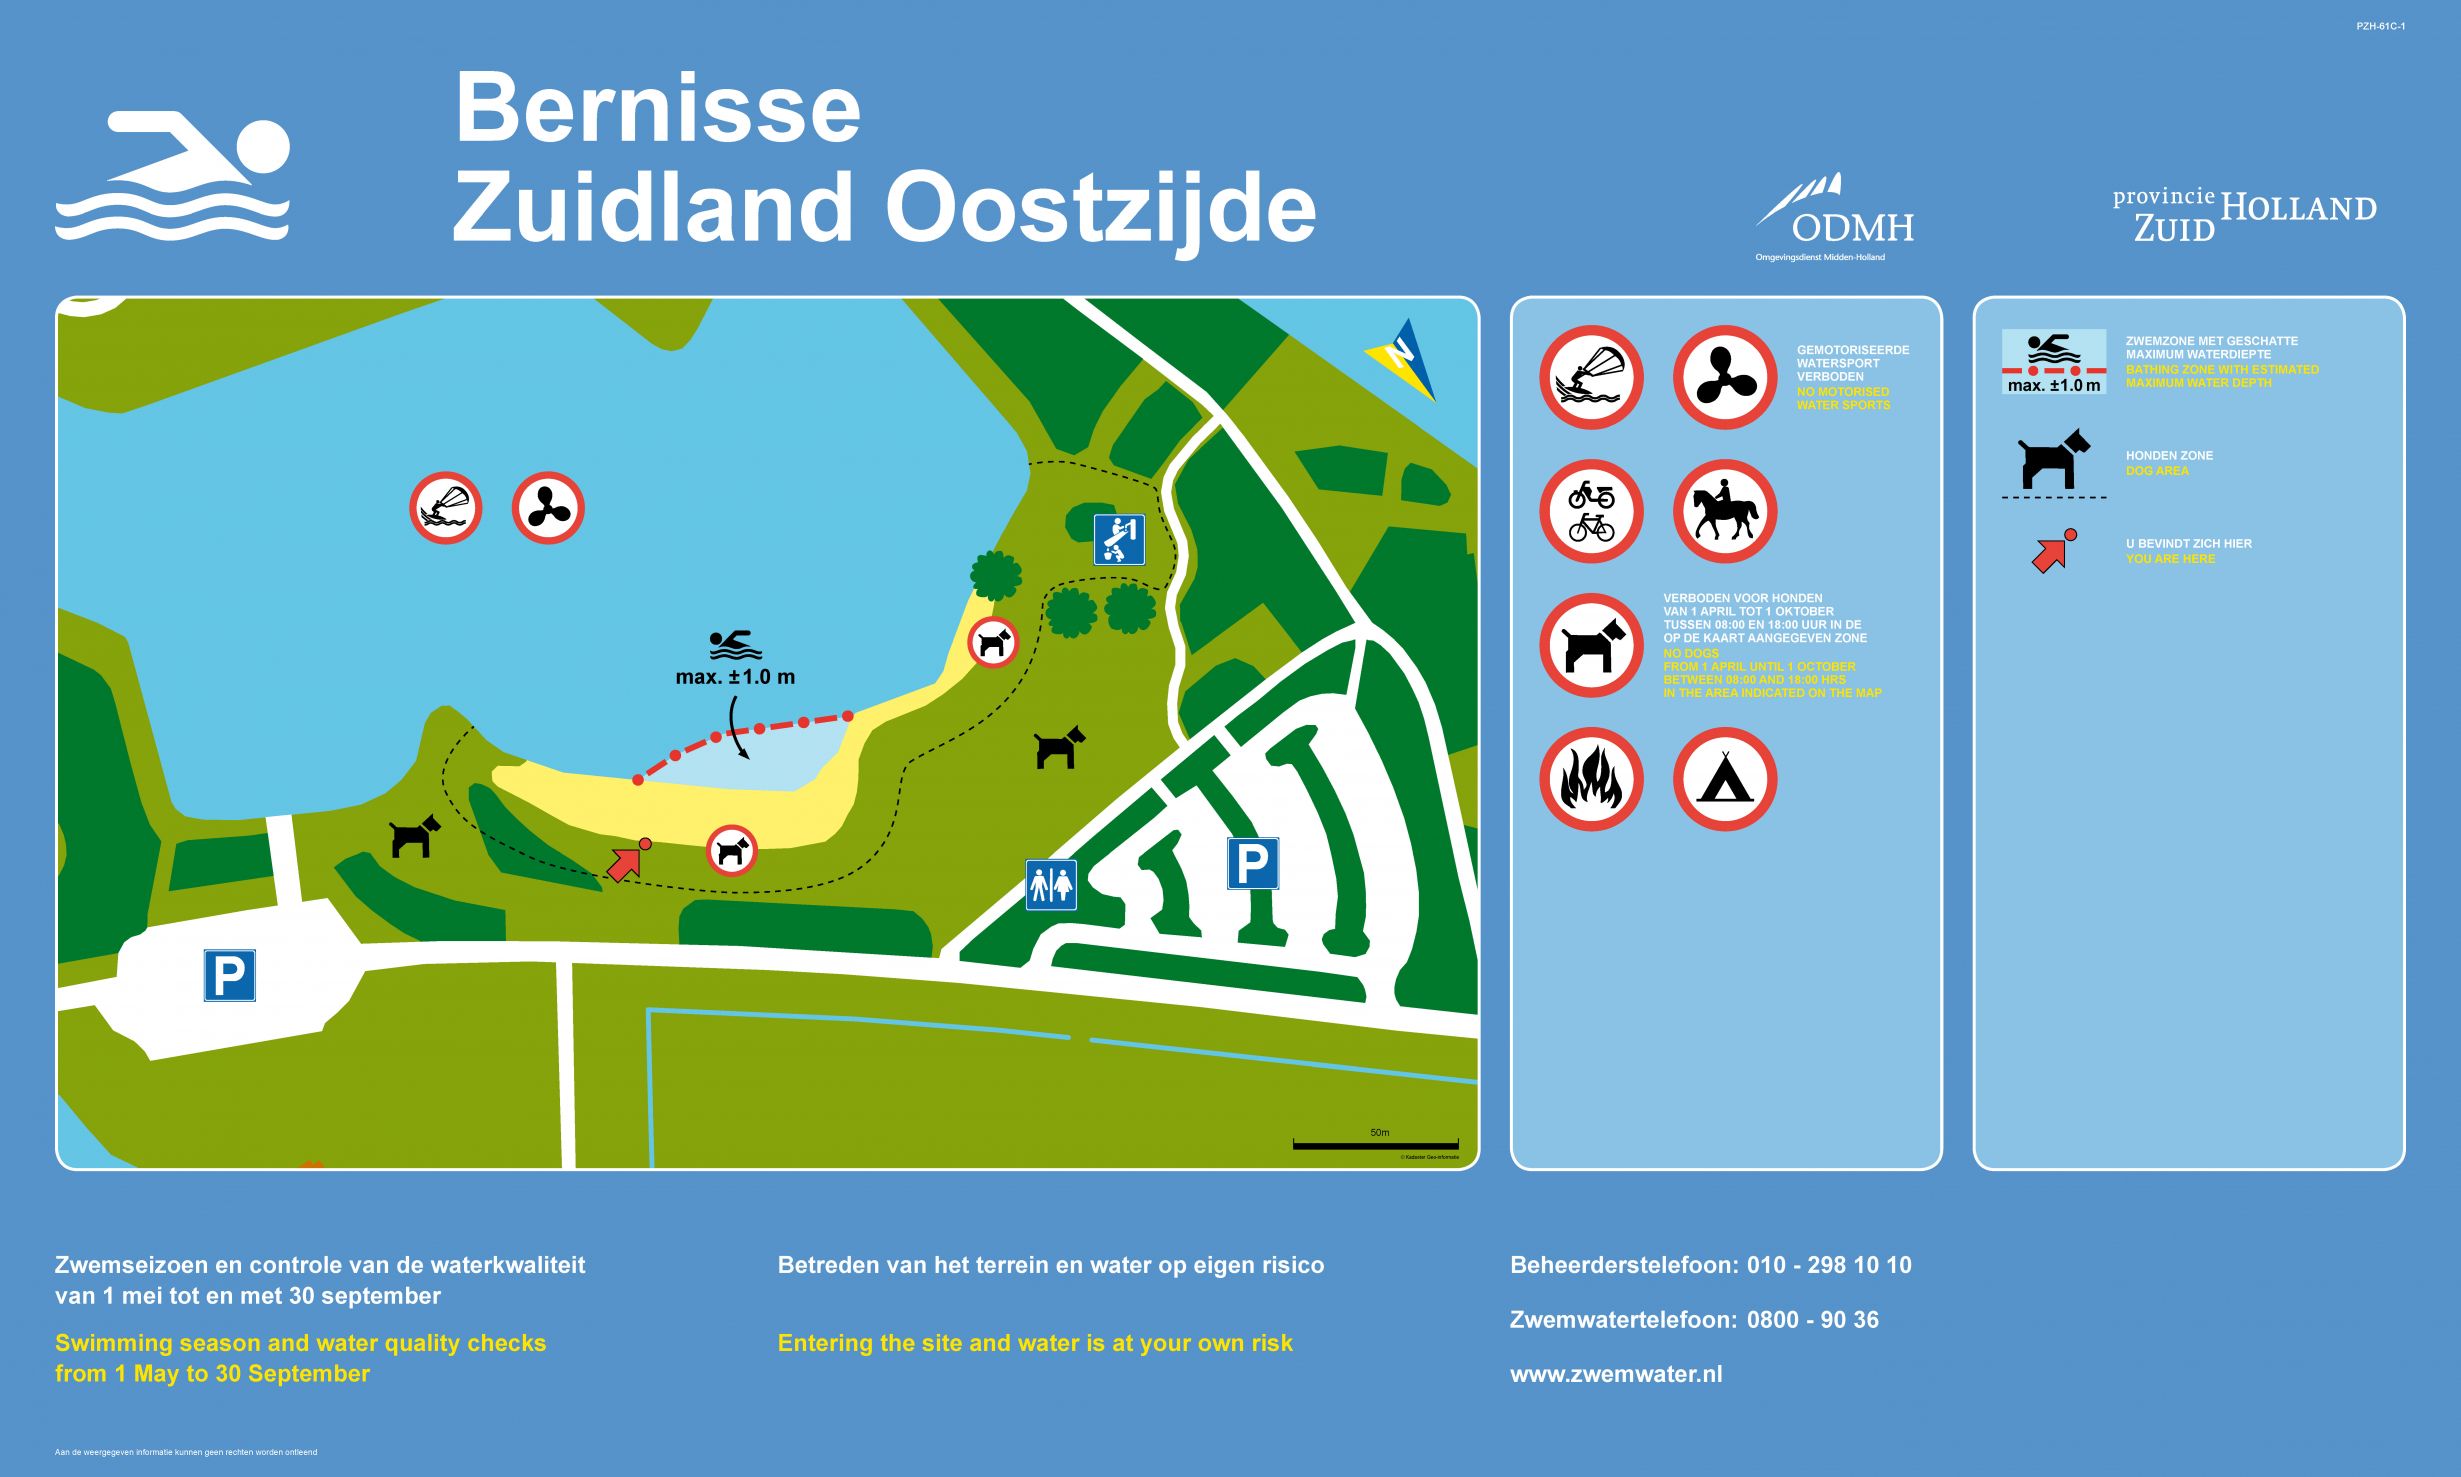 The information board at the swimming location Bernisse Zuidland Oostzijde